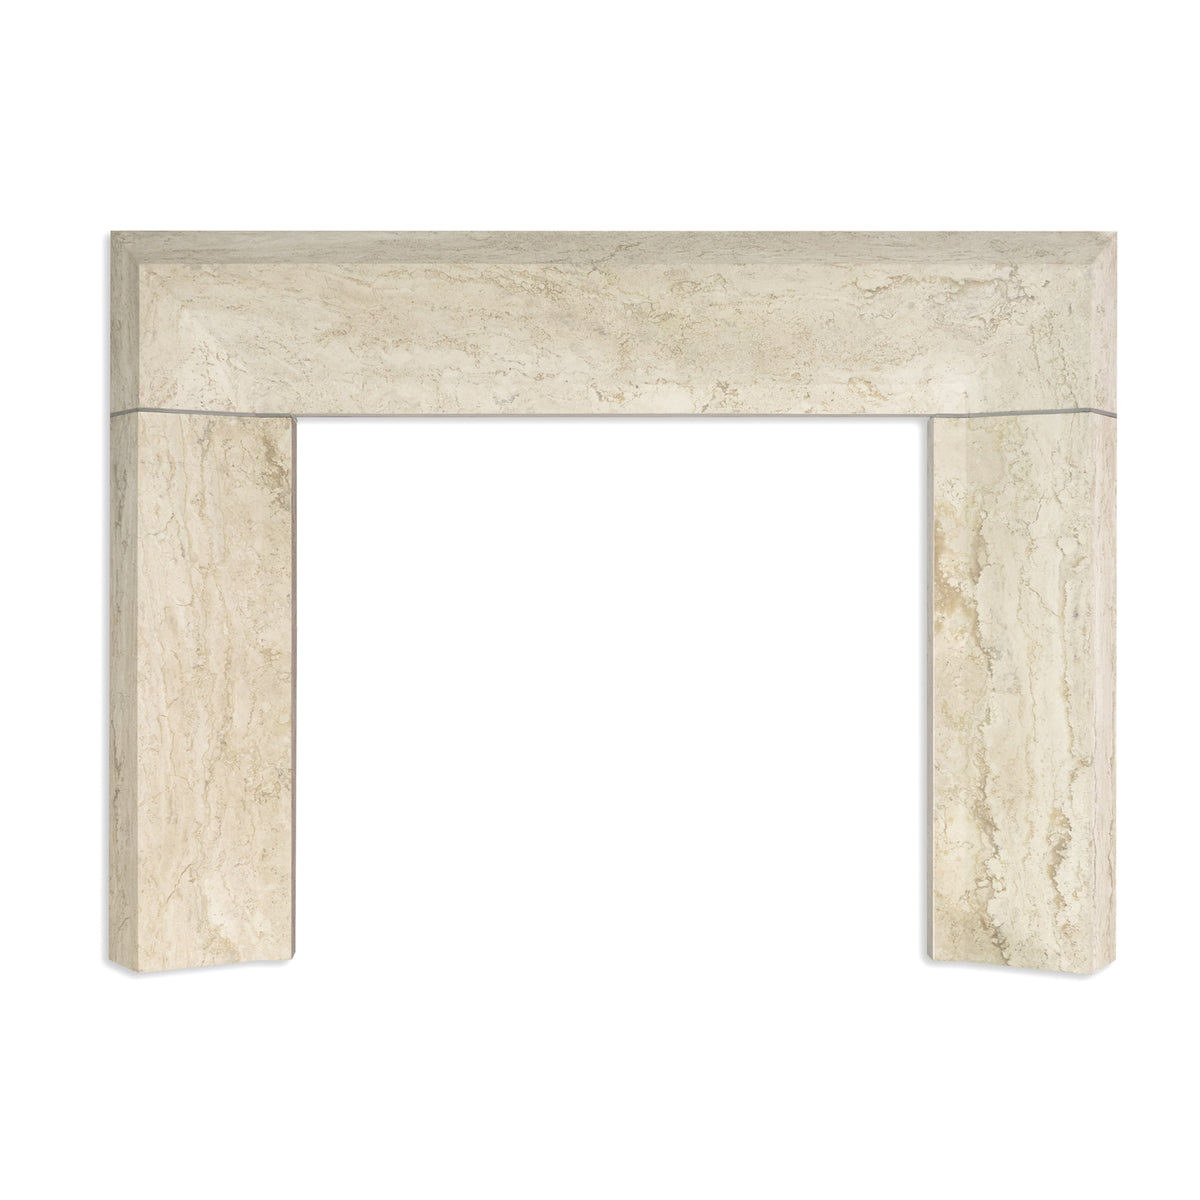 Meridian Fireplace in Maderno Travertine with Honed Finish view 3